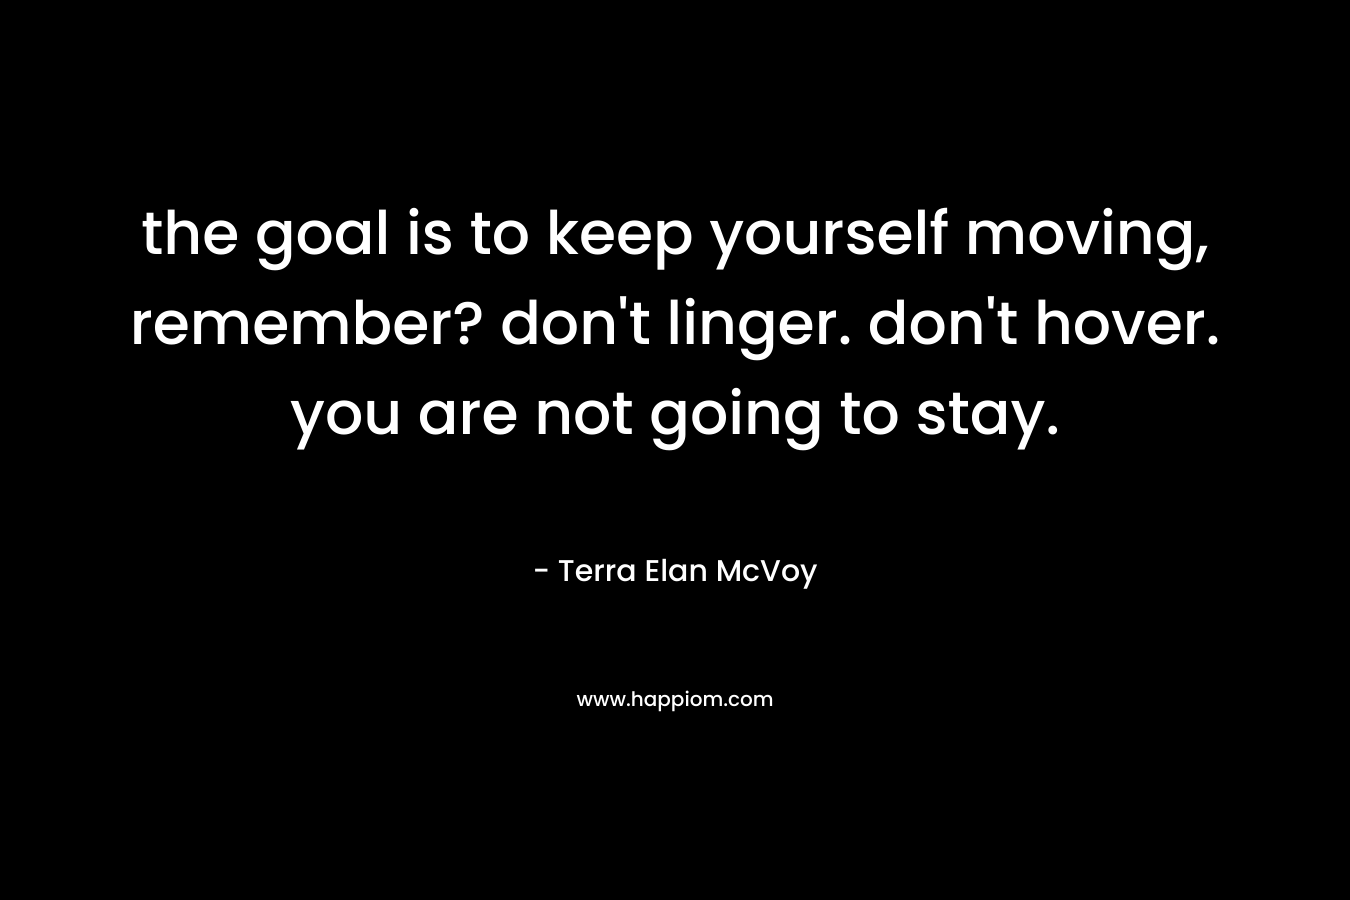 the goal is to keep yourself moving, remember? don't linger. don't hover. you are not going to stay.